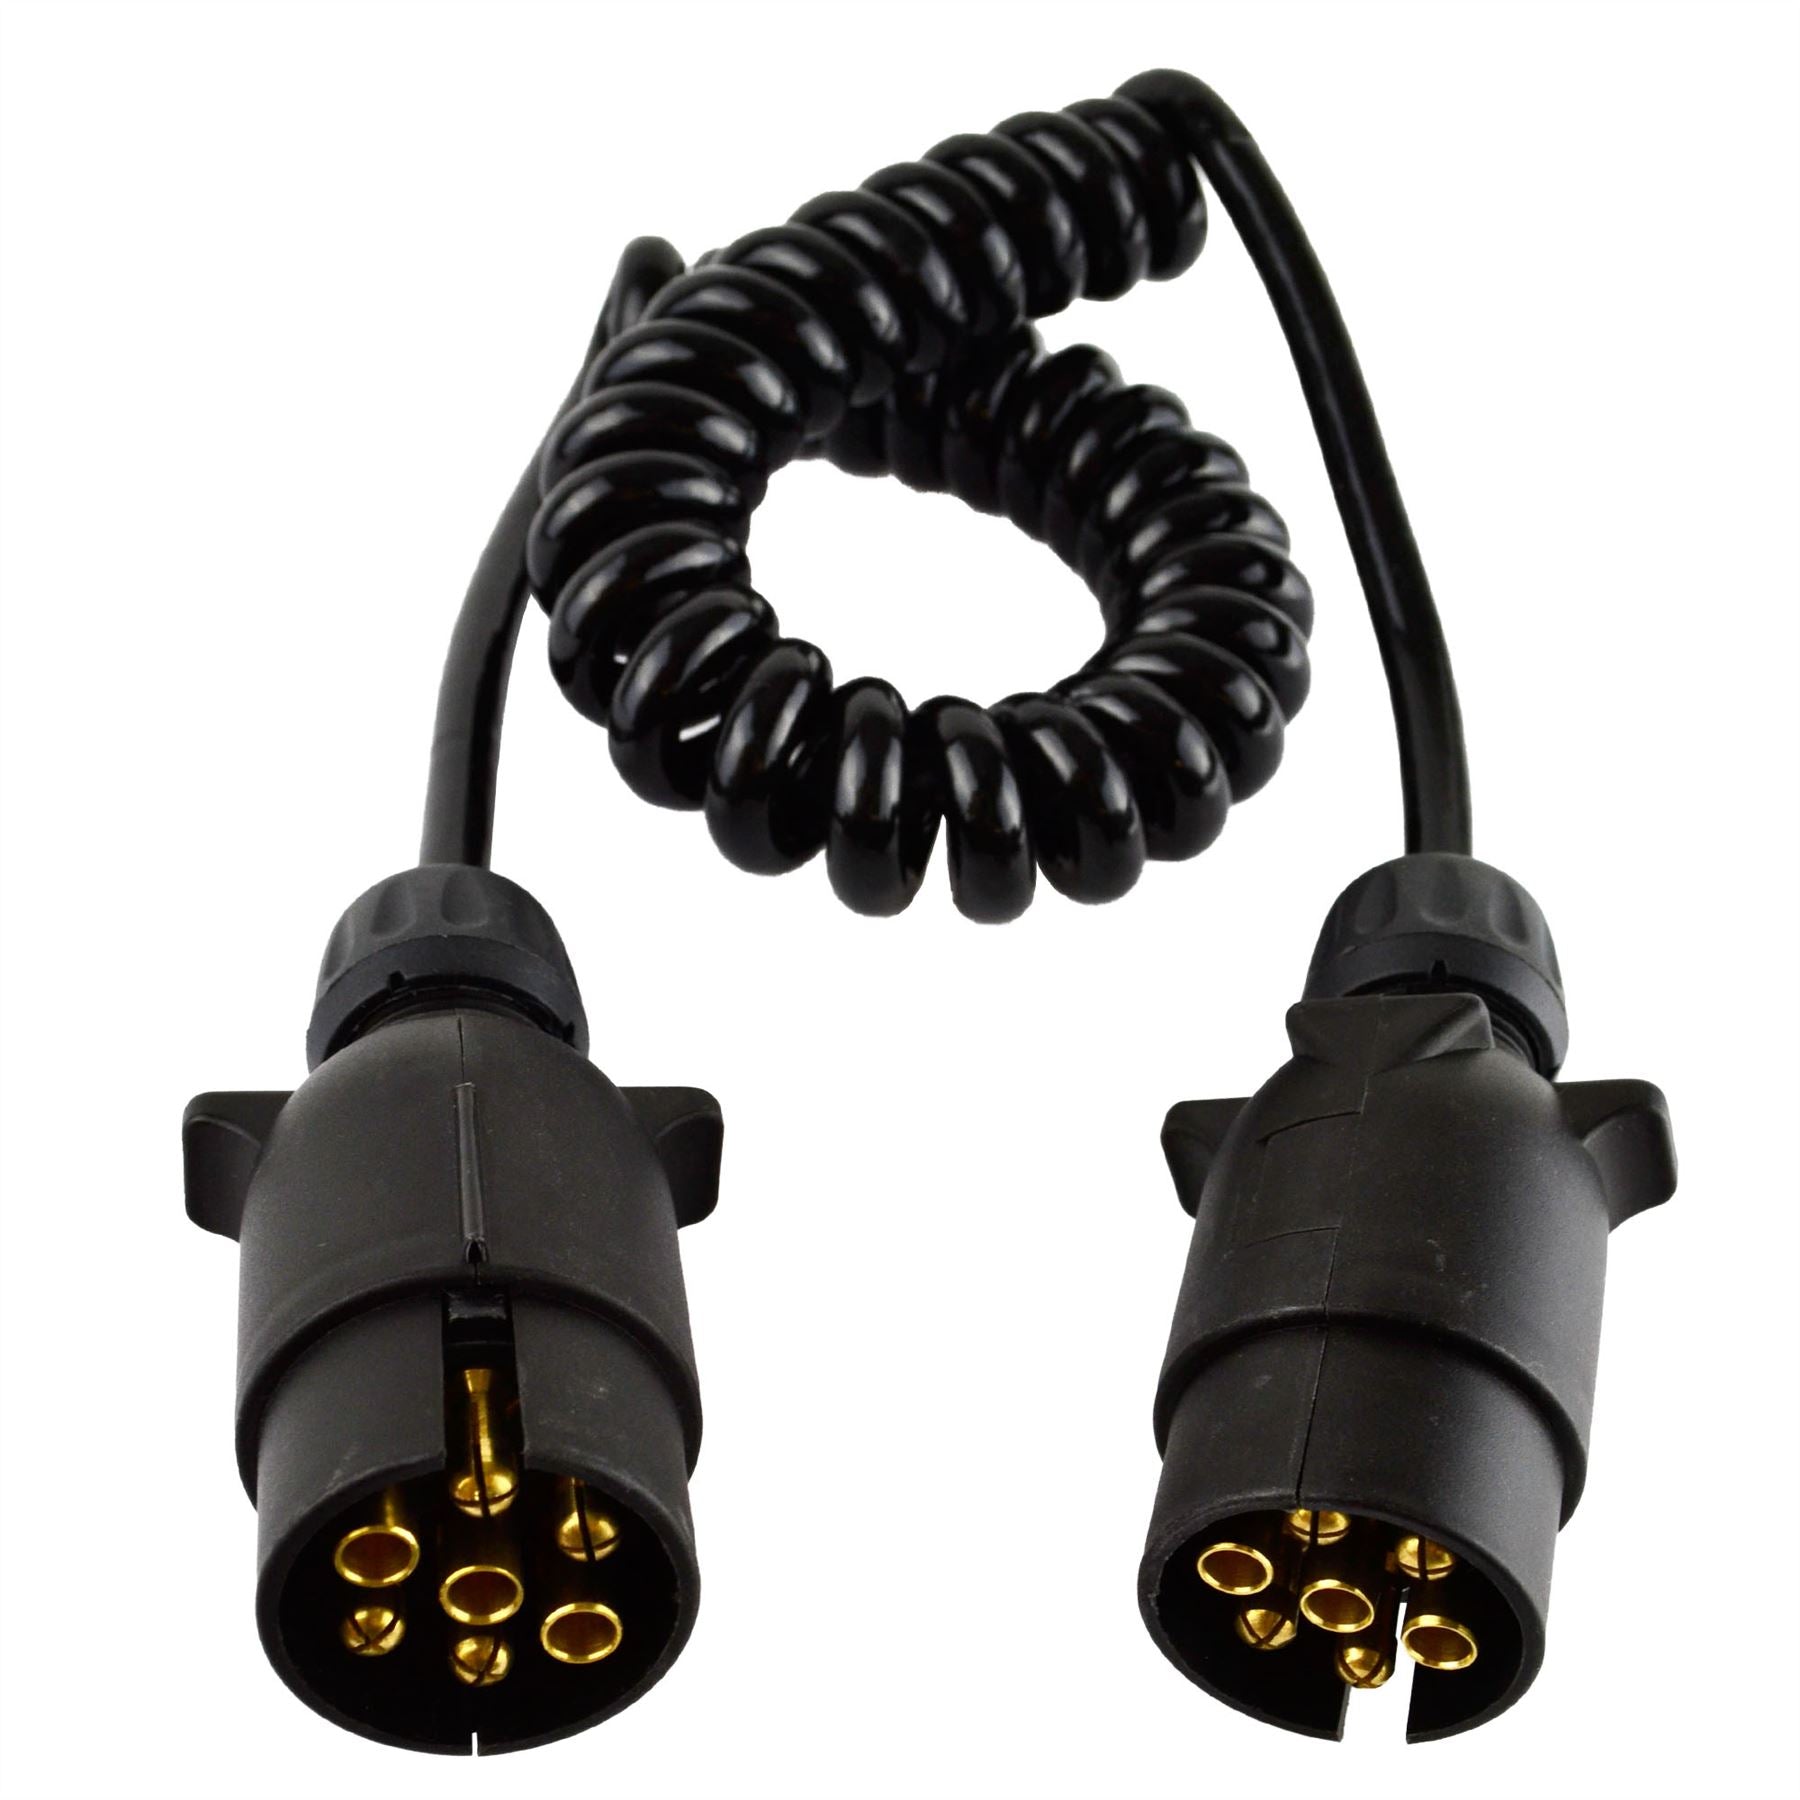 Trailer Electrics 1.5m Curly Extension Cable Male to Male 7 Pin